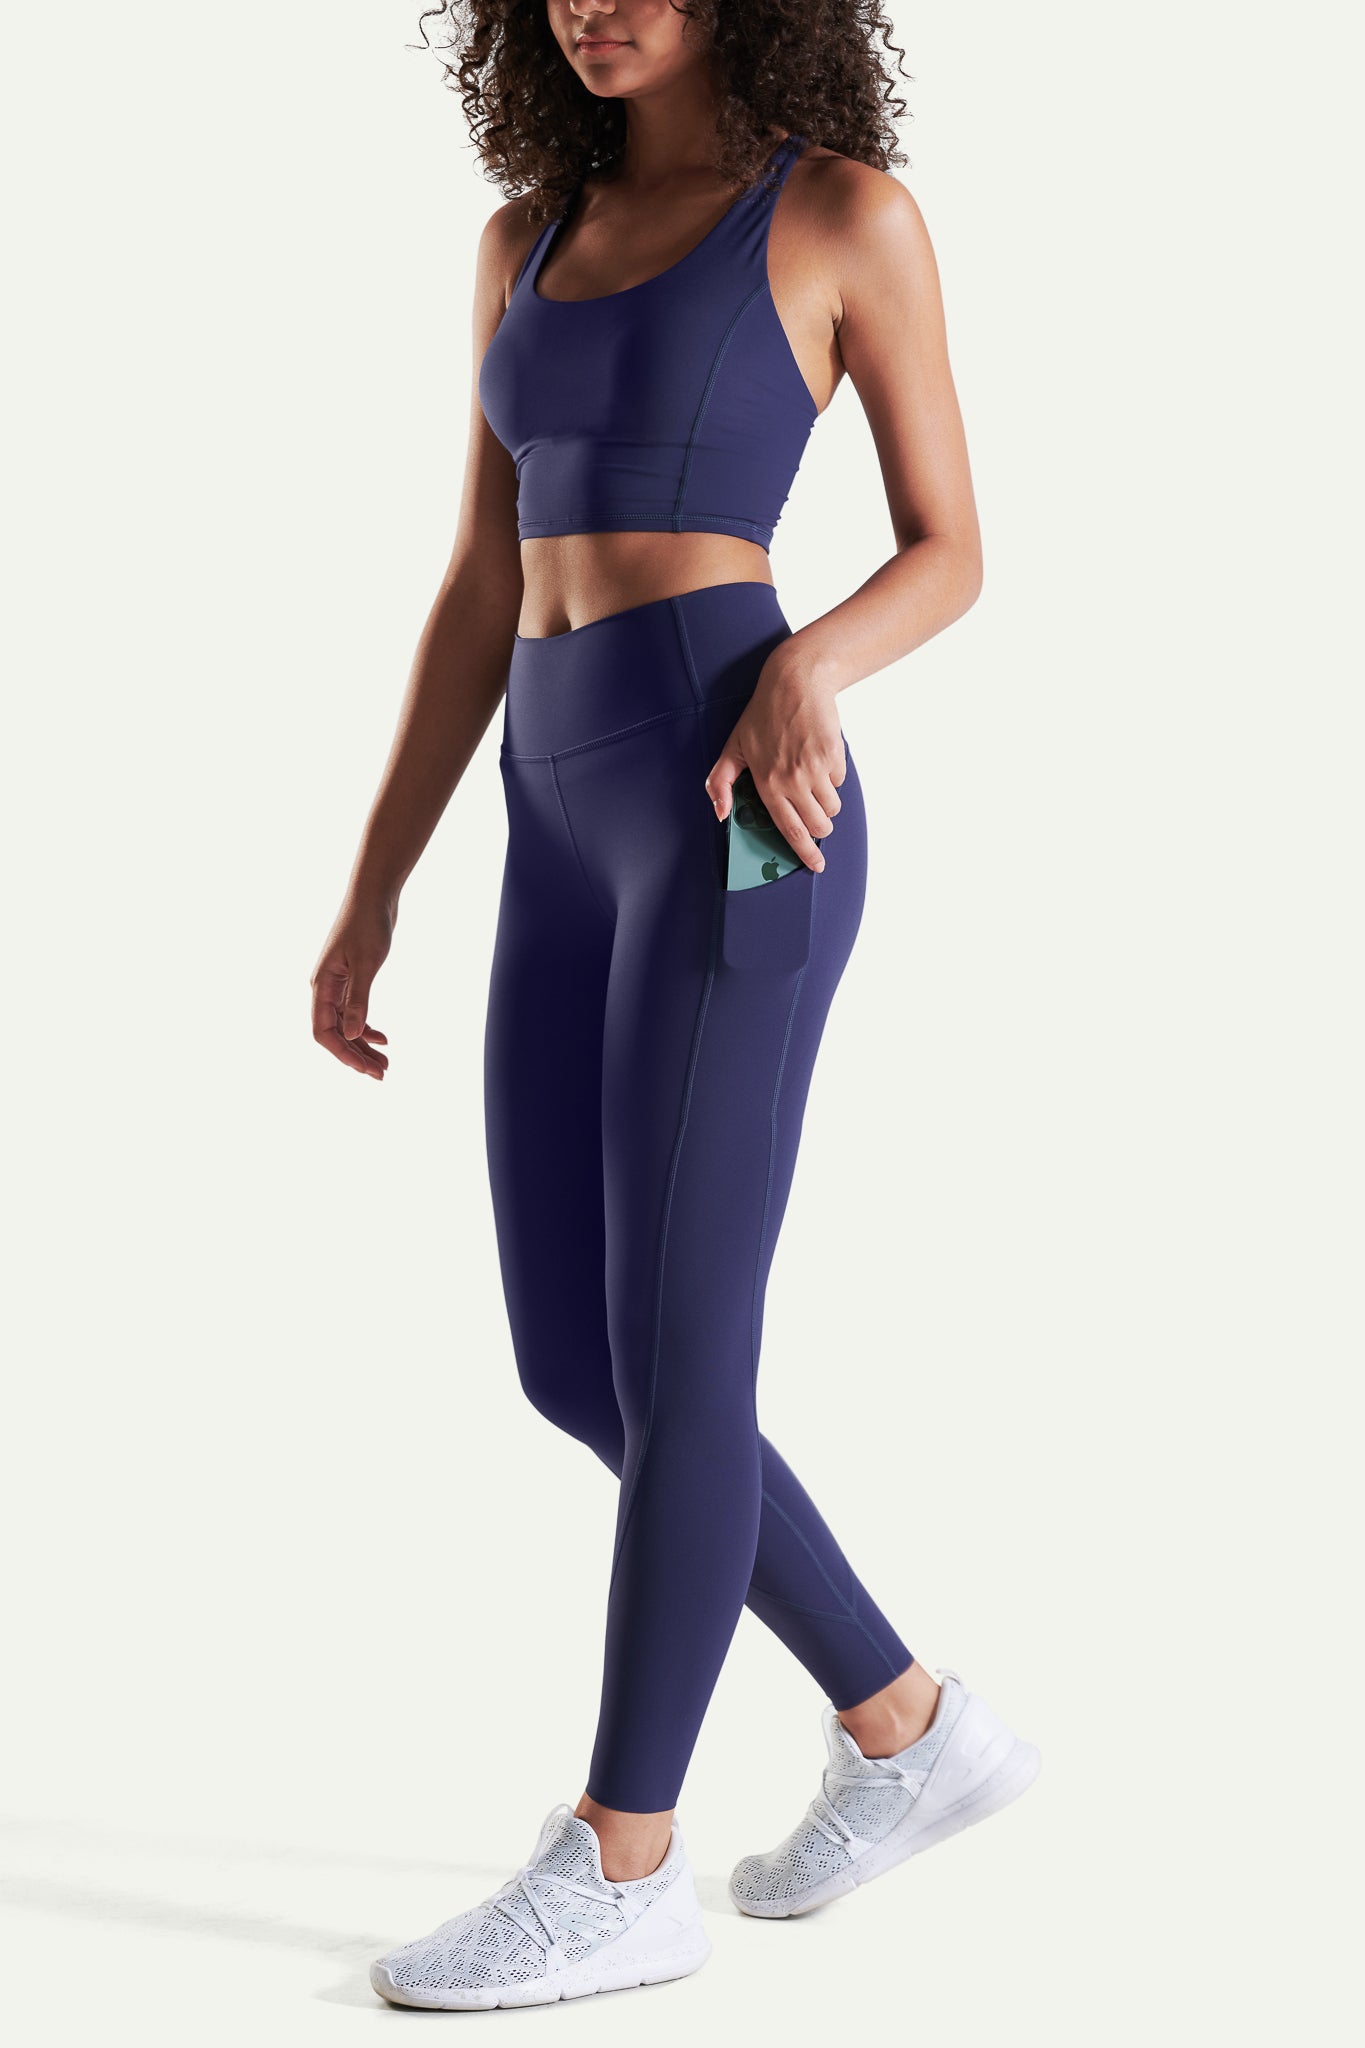 Kydra Athletics - Our bestsellers, Thalia Bra & Kyro Leggings, are flying  off the shelves! 🤸‍♀️ We're turning four with a sitewide 20% off, includes  clearance. No minimum spend required. Wait no